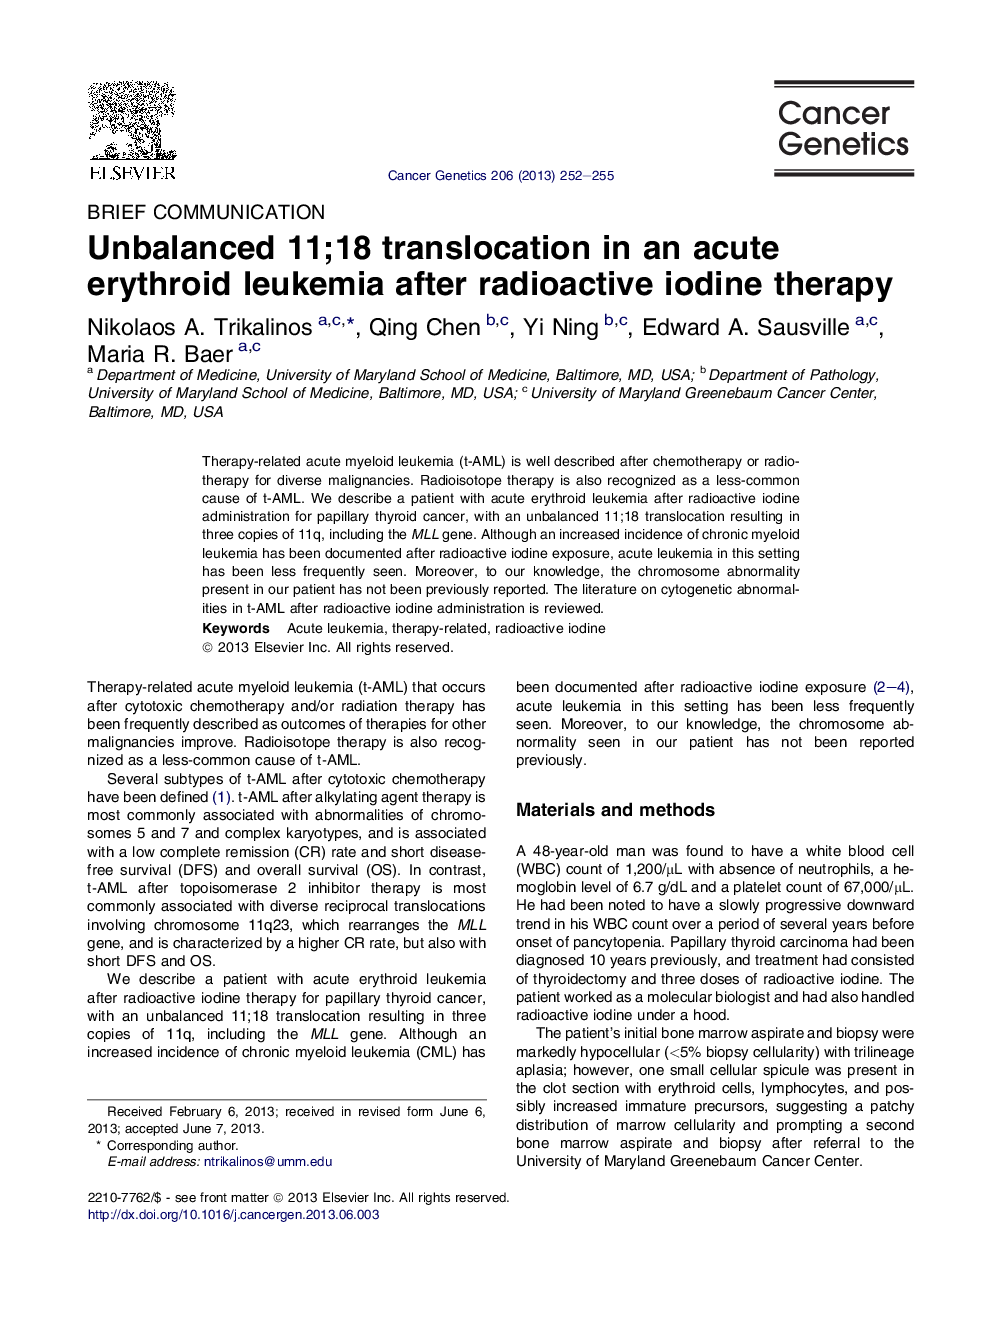 Unbalanced 11;18 translocation in an acute erythroid leukemia after radioactive iodine therapy